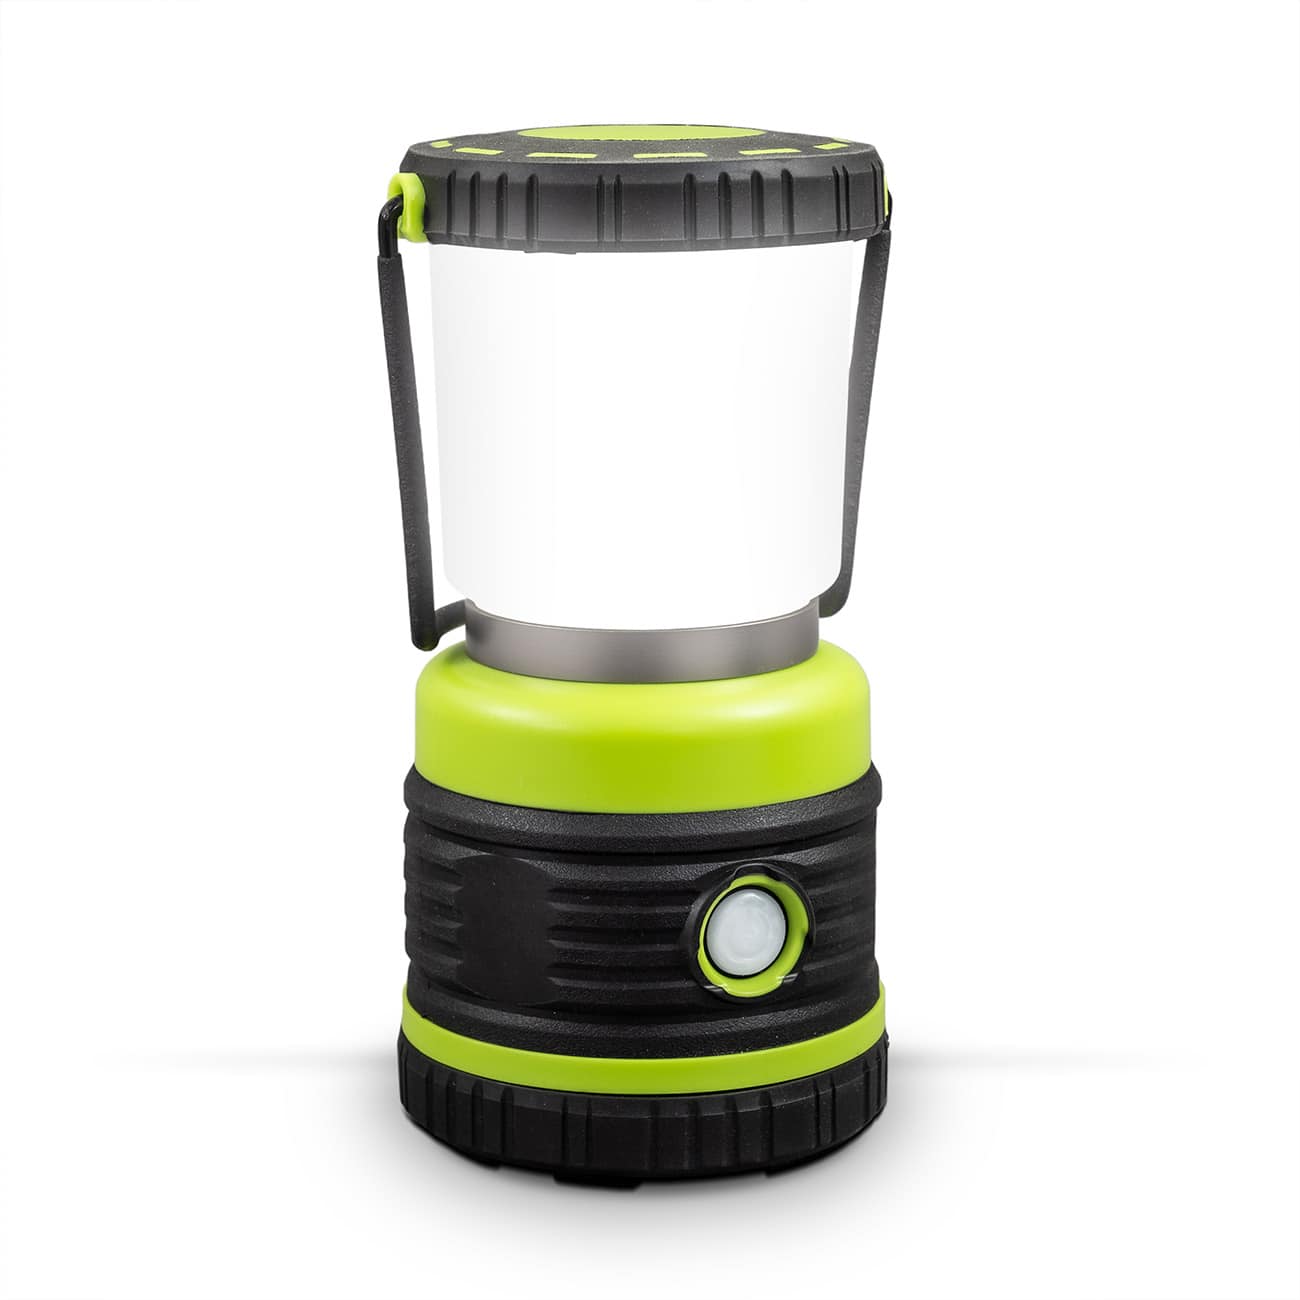 LED Outdoor Campingleuchte mit Tragegriff - 1